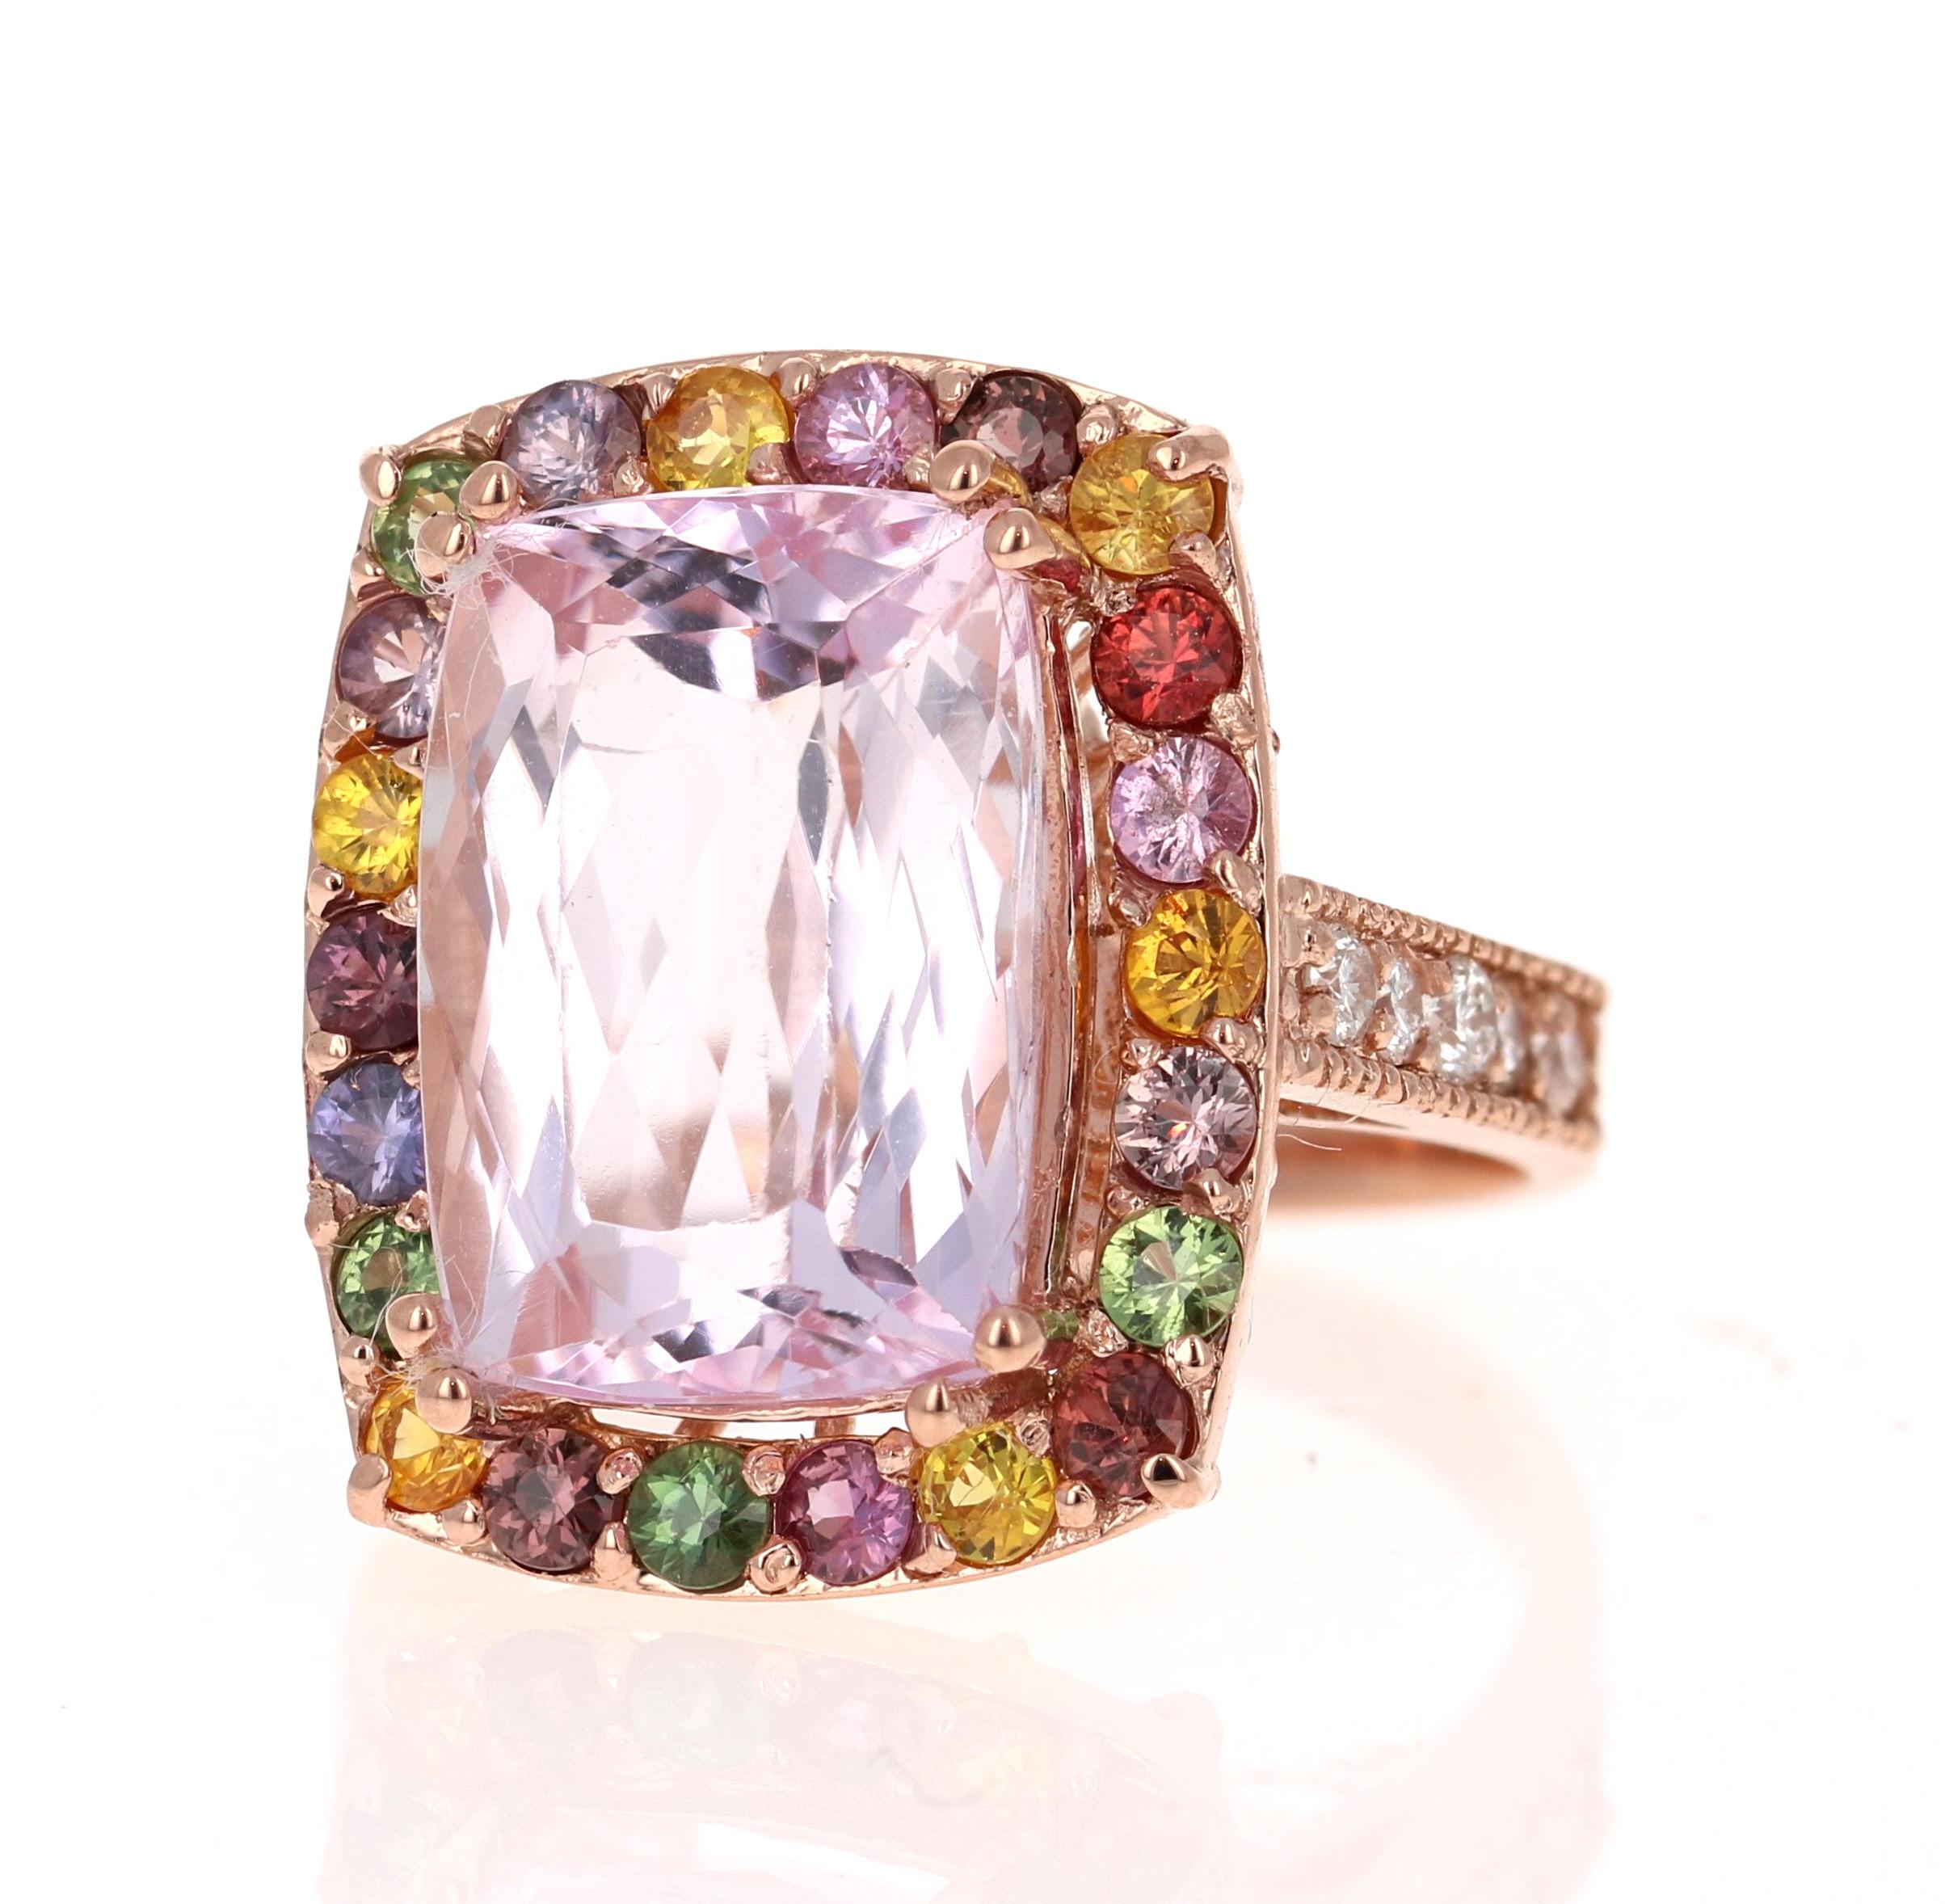 Candy Crush on your Finger!! 

This beautiful ring has a huge Emerald-Cushion Cut 10.25 Carat Kunzite that is set in the center of the ring and is surrounded by 22 Round Cut Multi-Colored Natural Sapphires that weigh 1.62 Carats.  This gorgeous ring